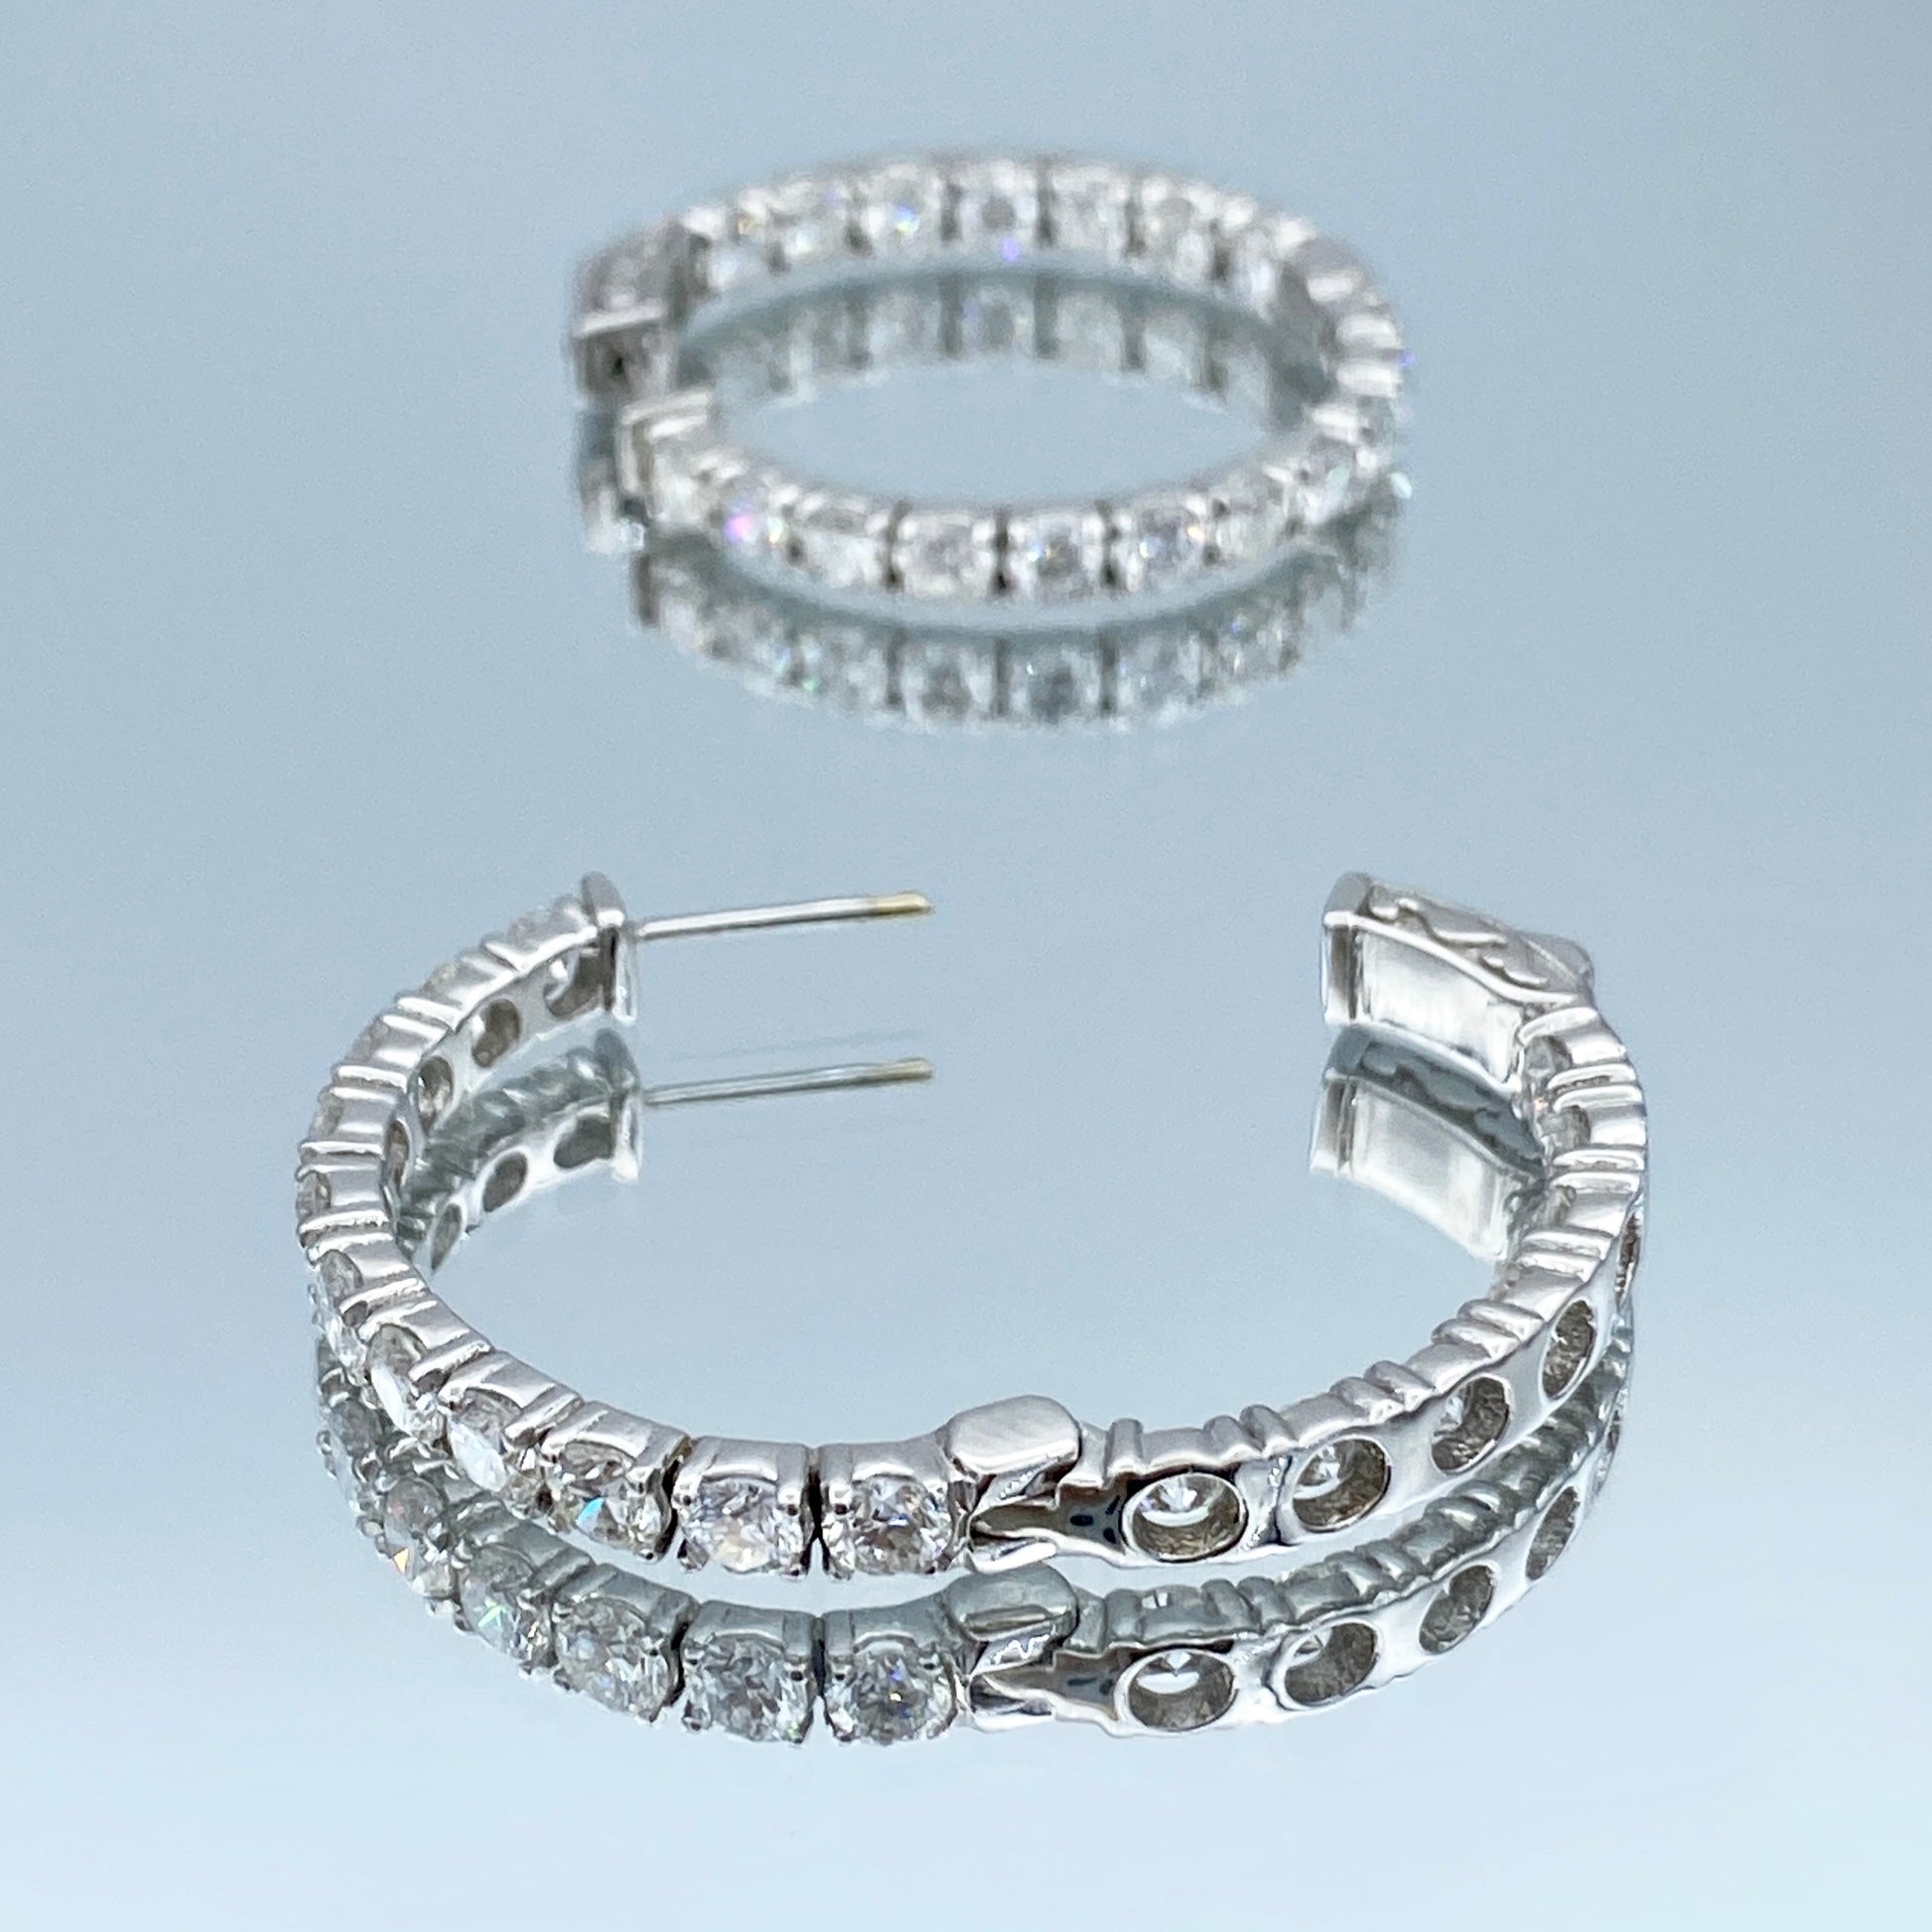 Inside-Out Diamond Hoop Earrings in 14K White Gold - L and L Jewelry